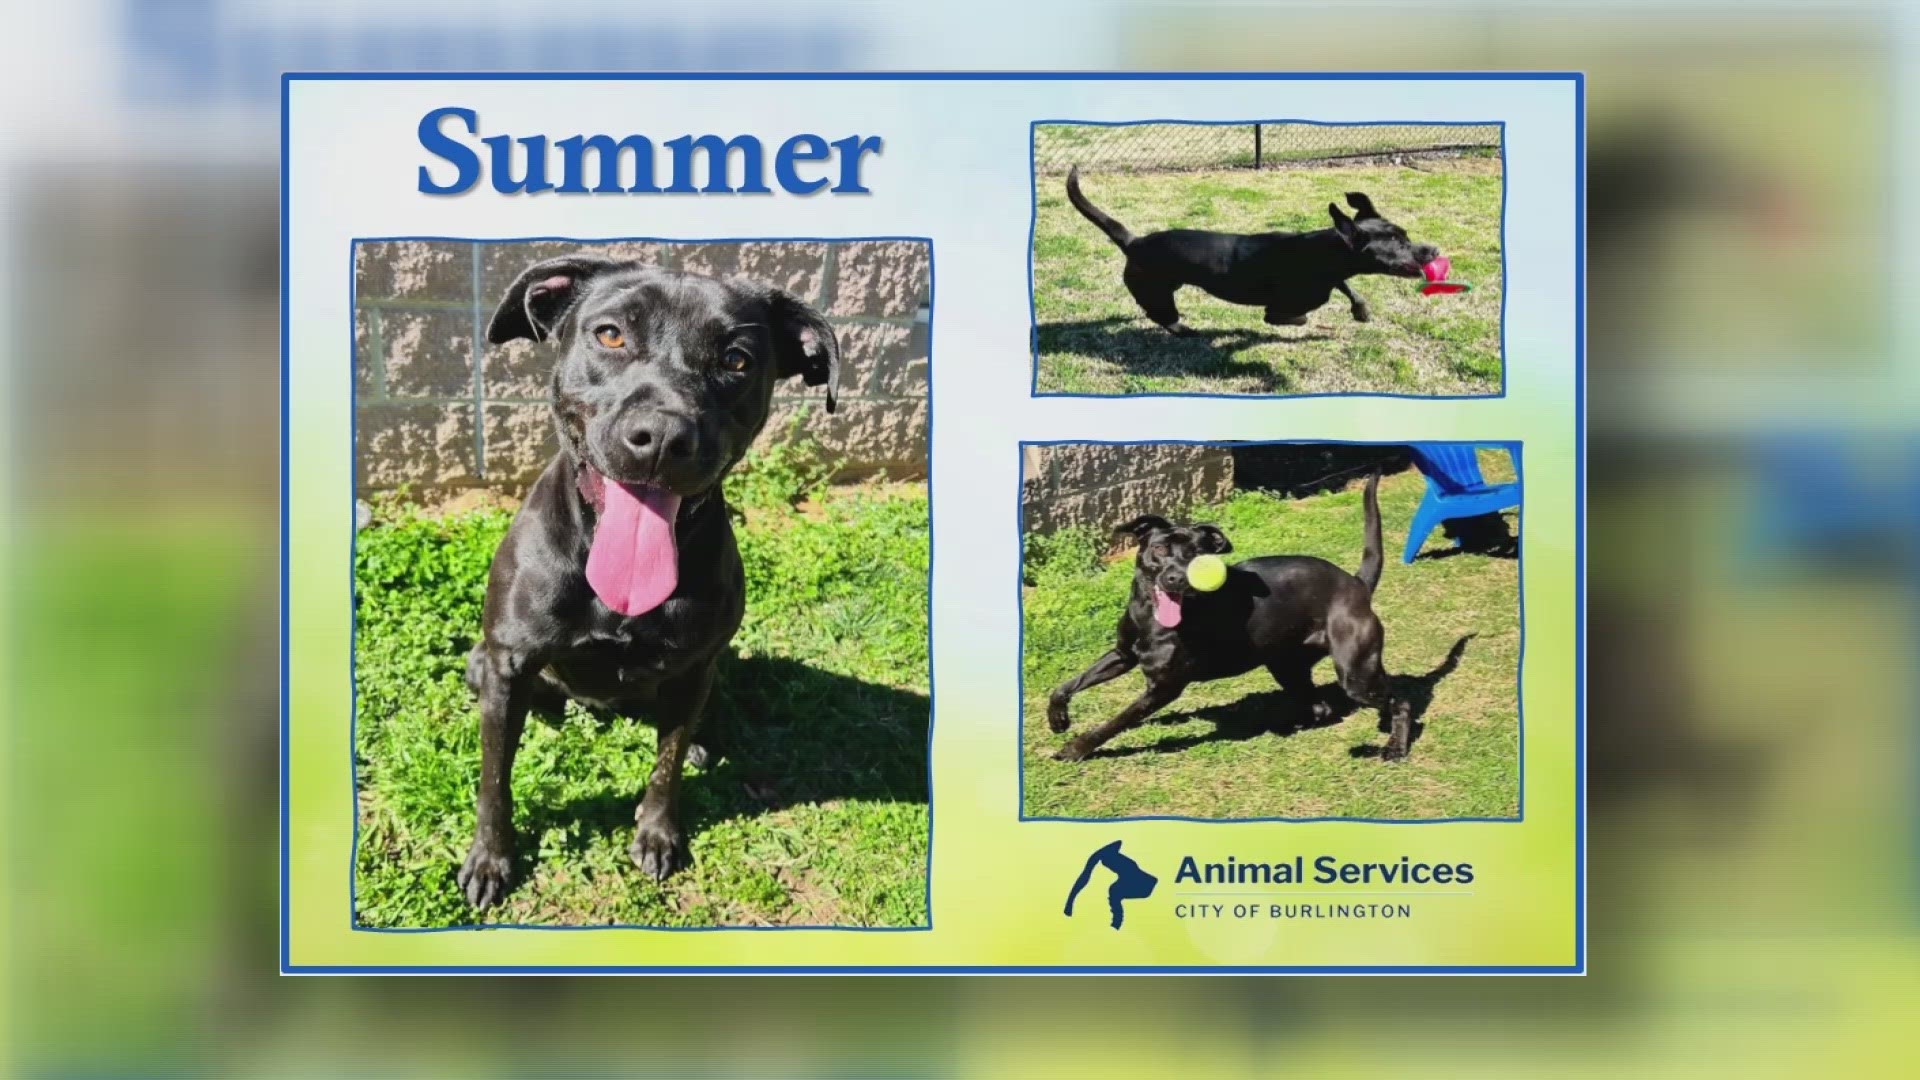 Let’s get Summer adopted!